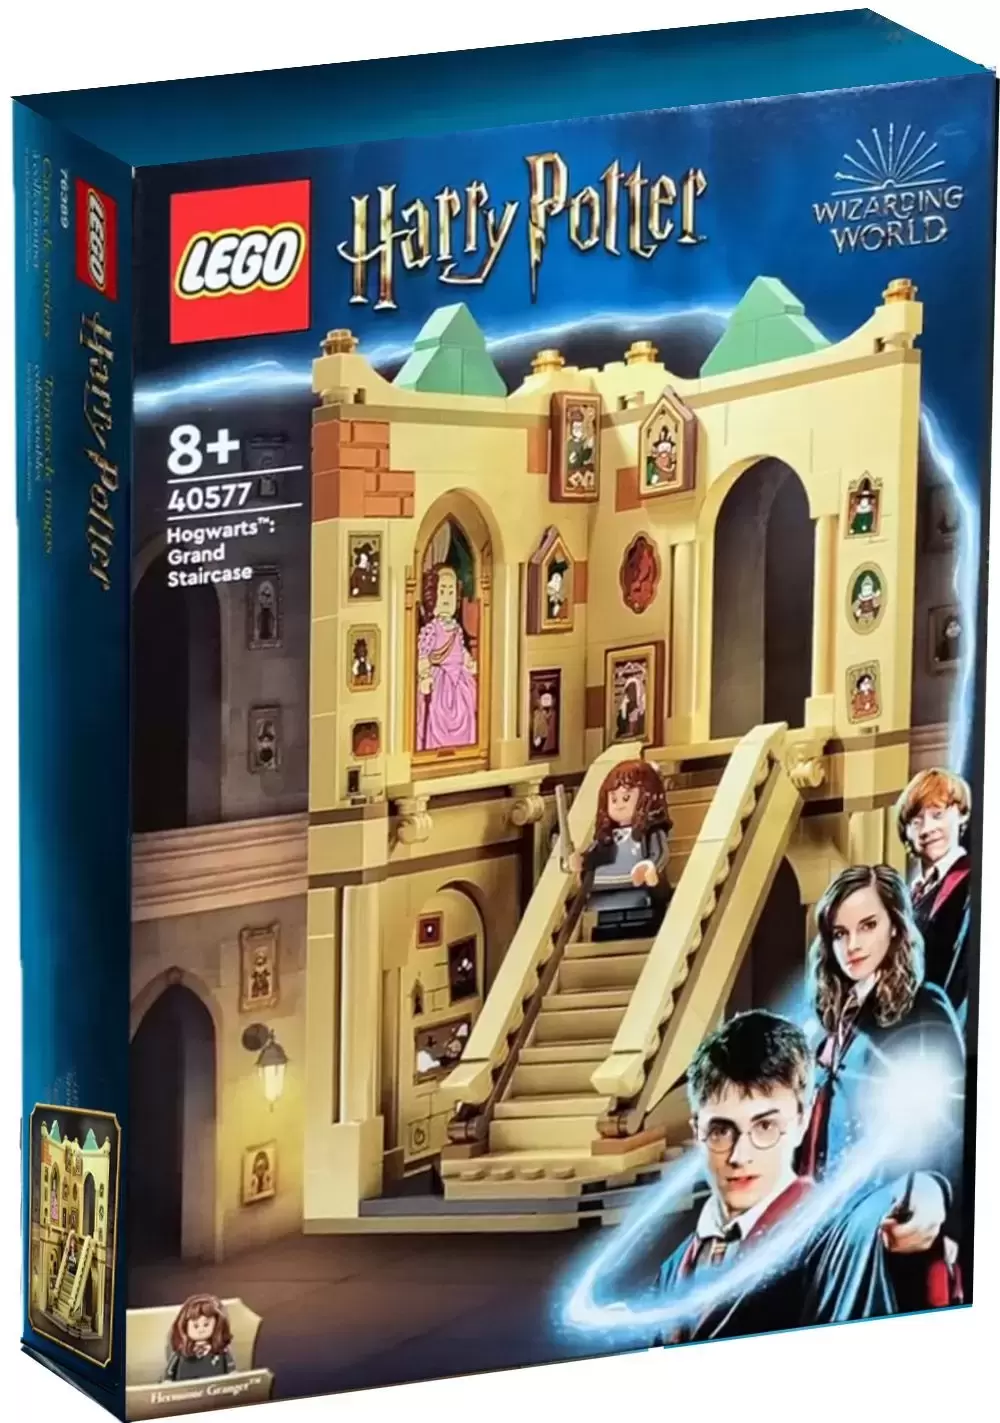 LEGO Harry Potter - Hogwarts : Grand Staircase